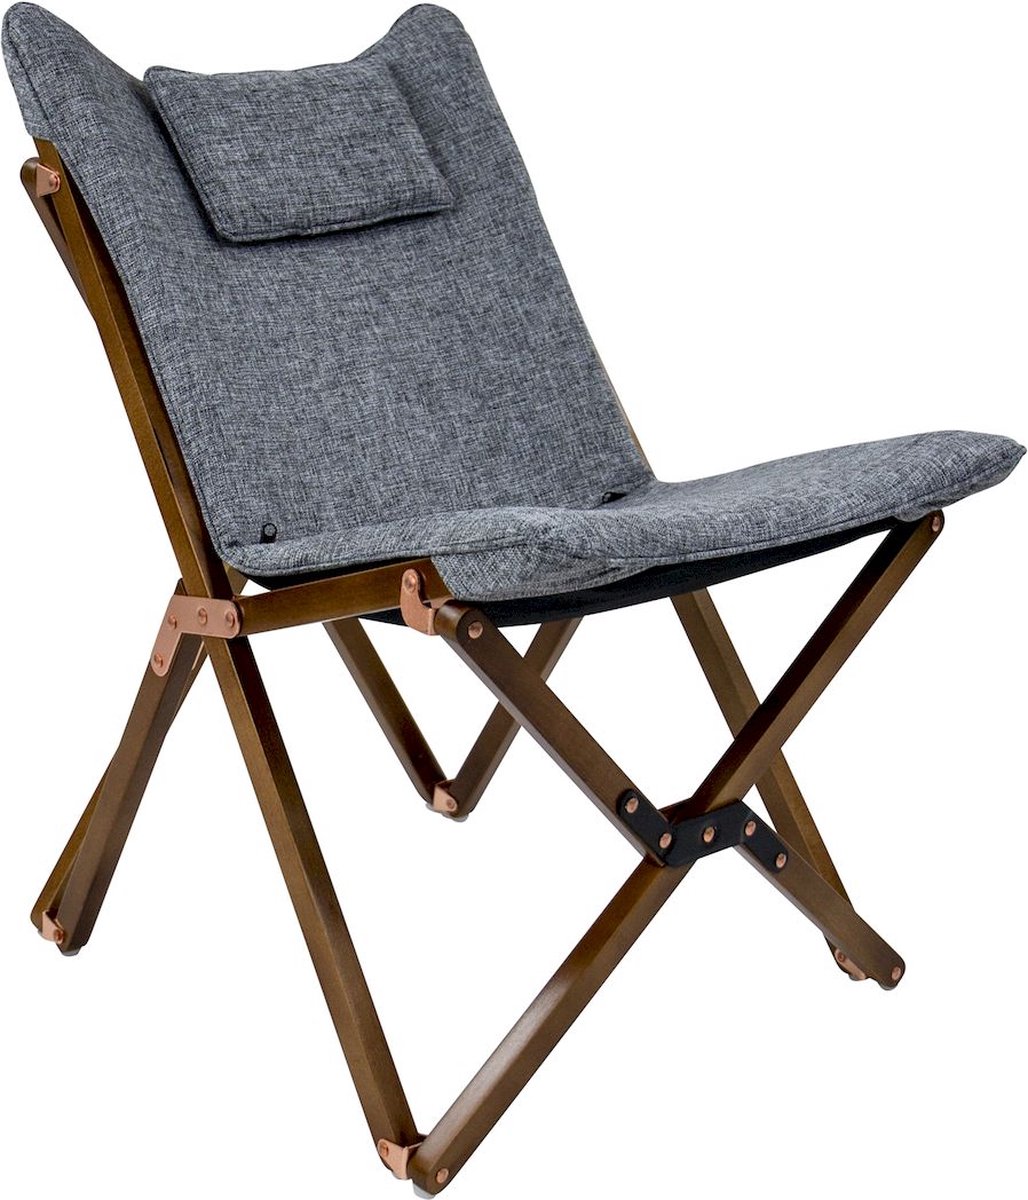 Bo-Camp Urban Outdoor collection - Relaxstoel - Bloomsbury - S - Oxford  polyester - Grijs | bol.com